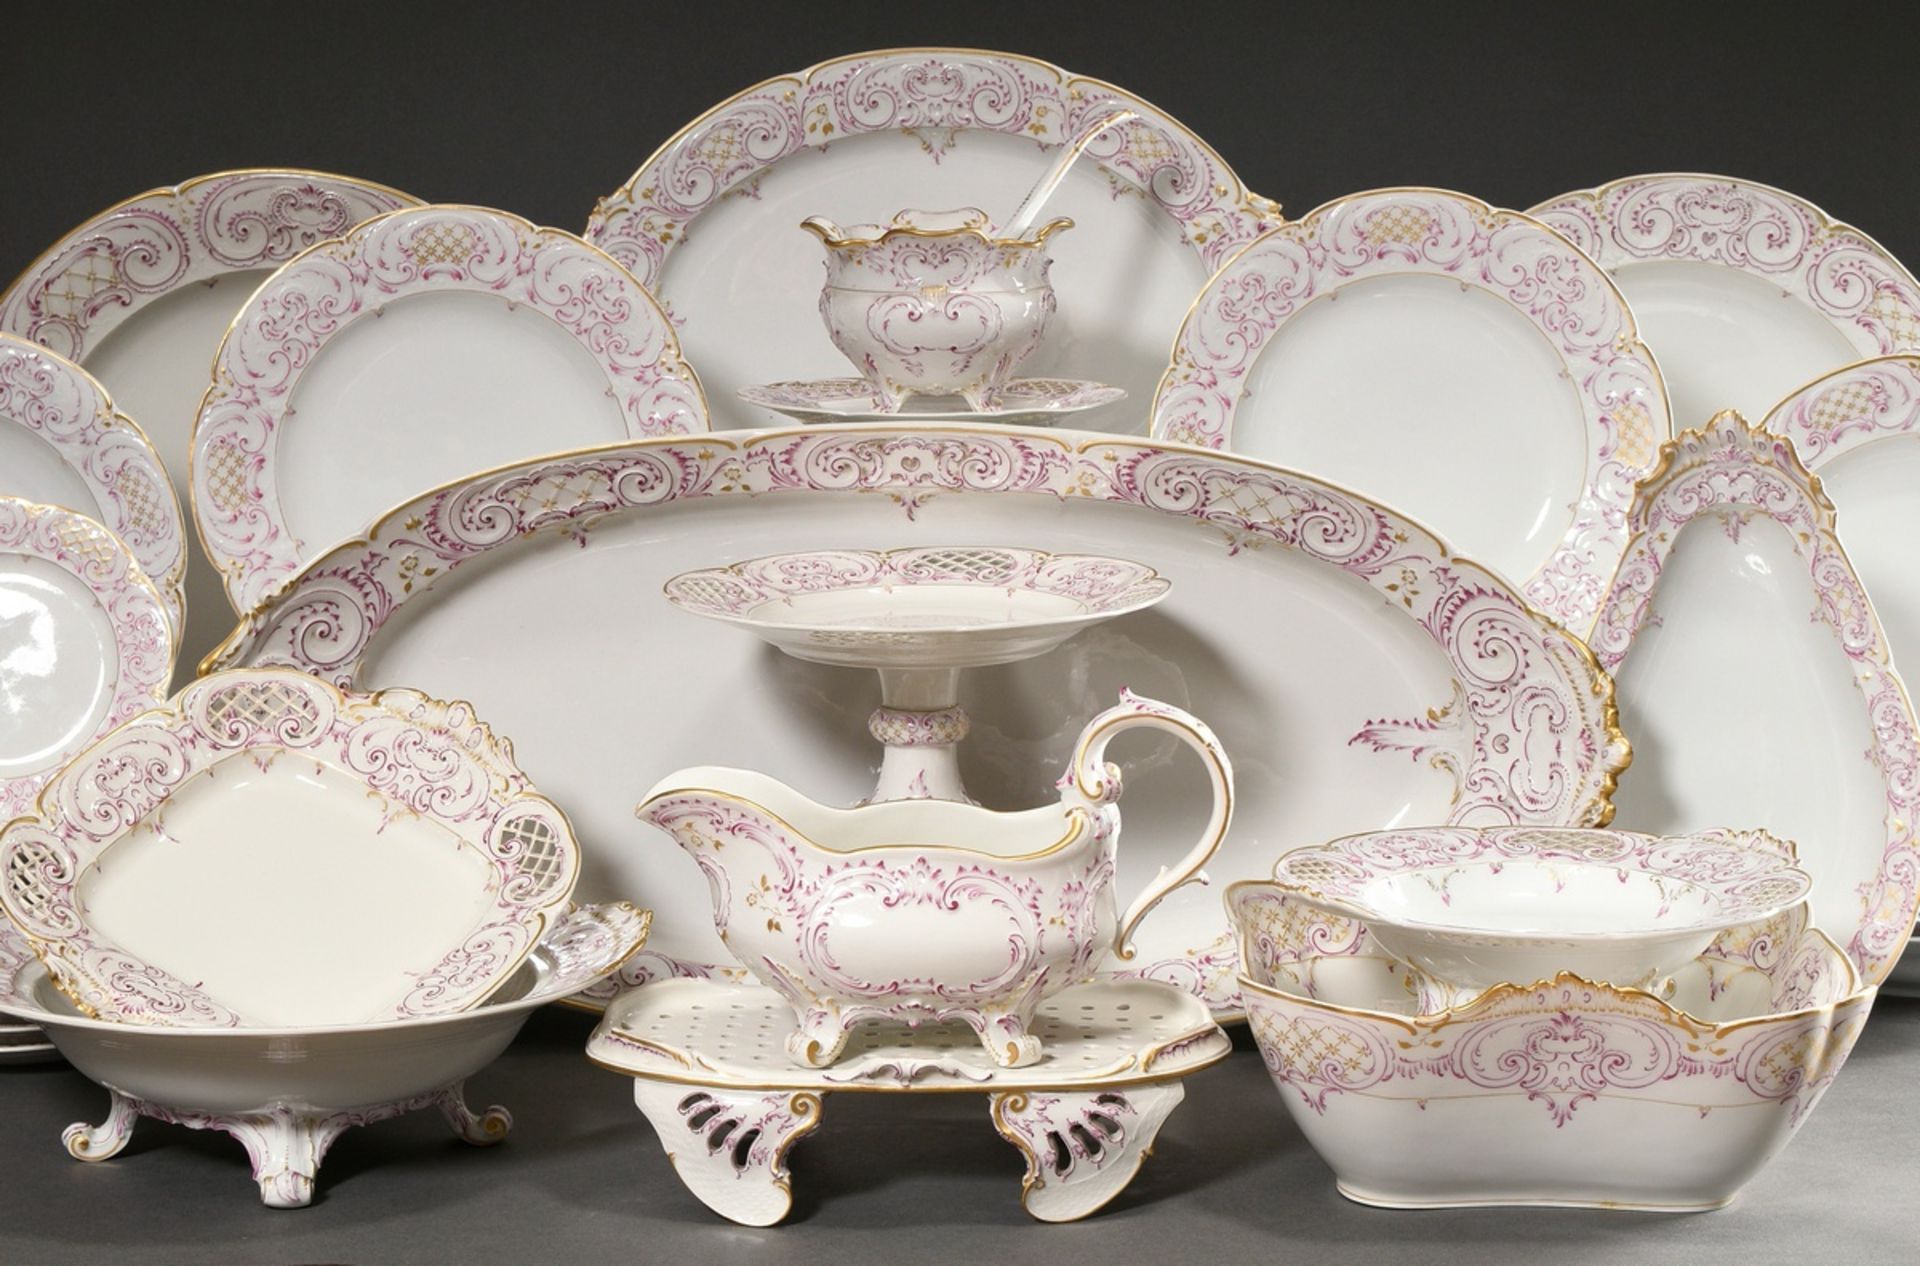 69 Pieces KPM dinner service in Rococo form with purple and gold staffage, red imperial orb mark, c